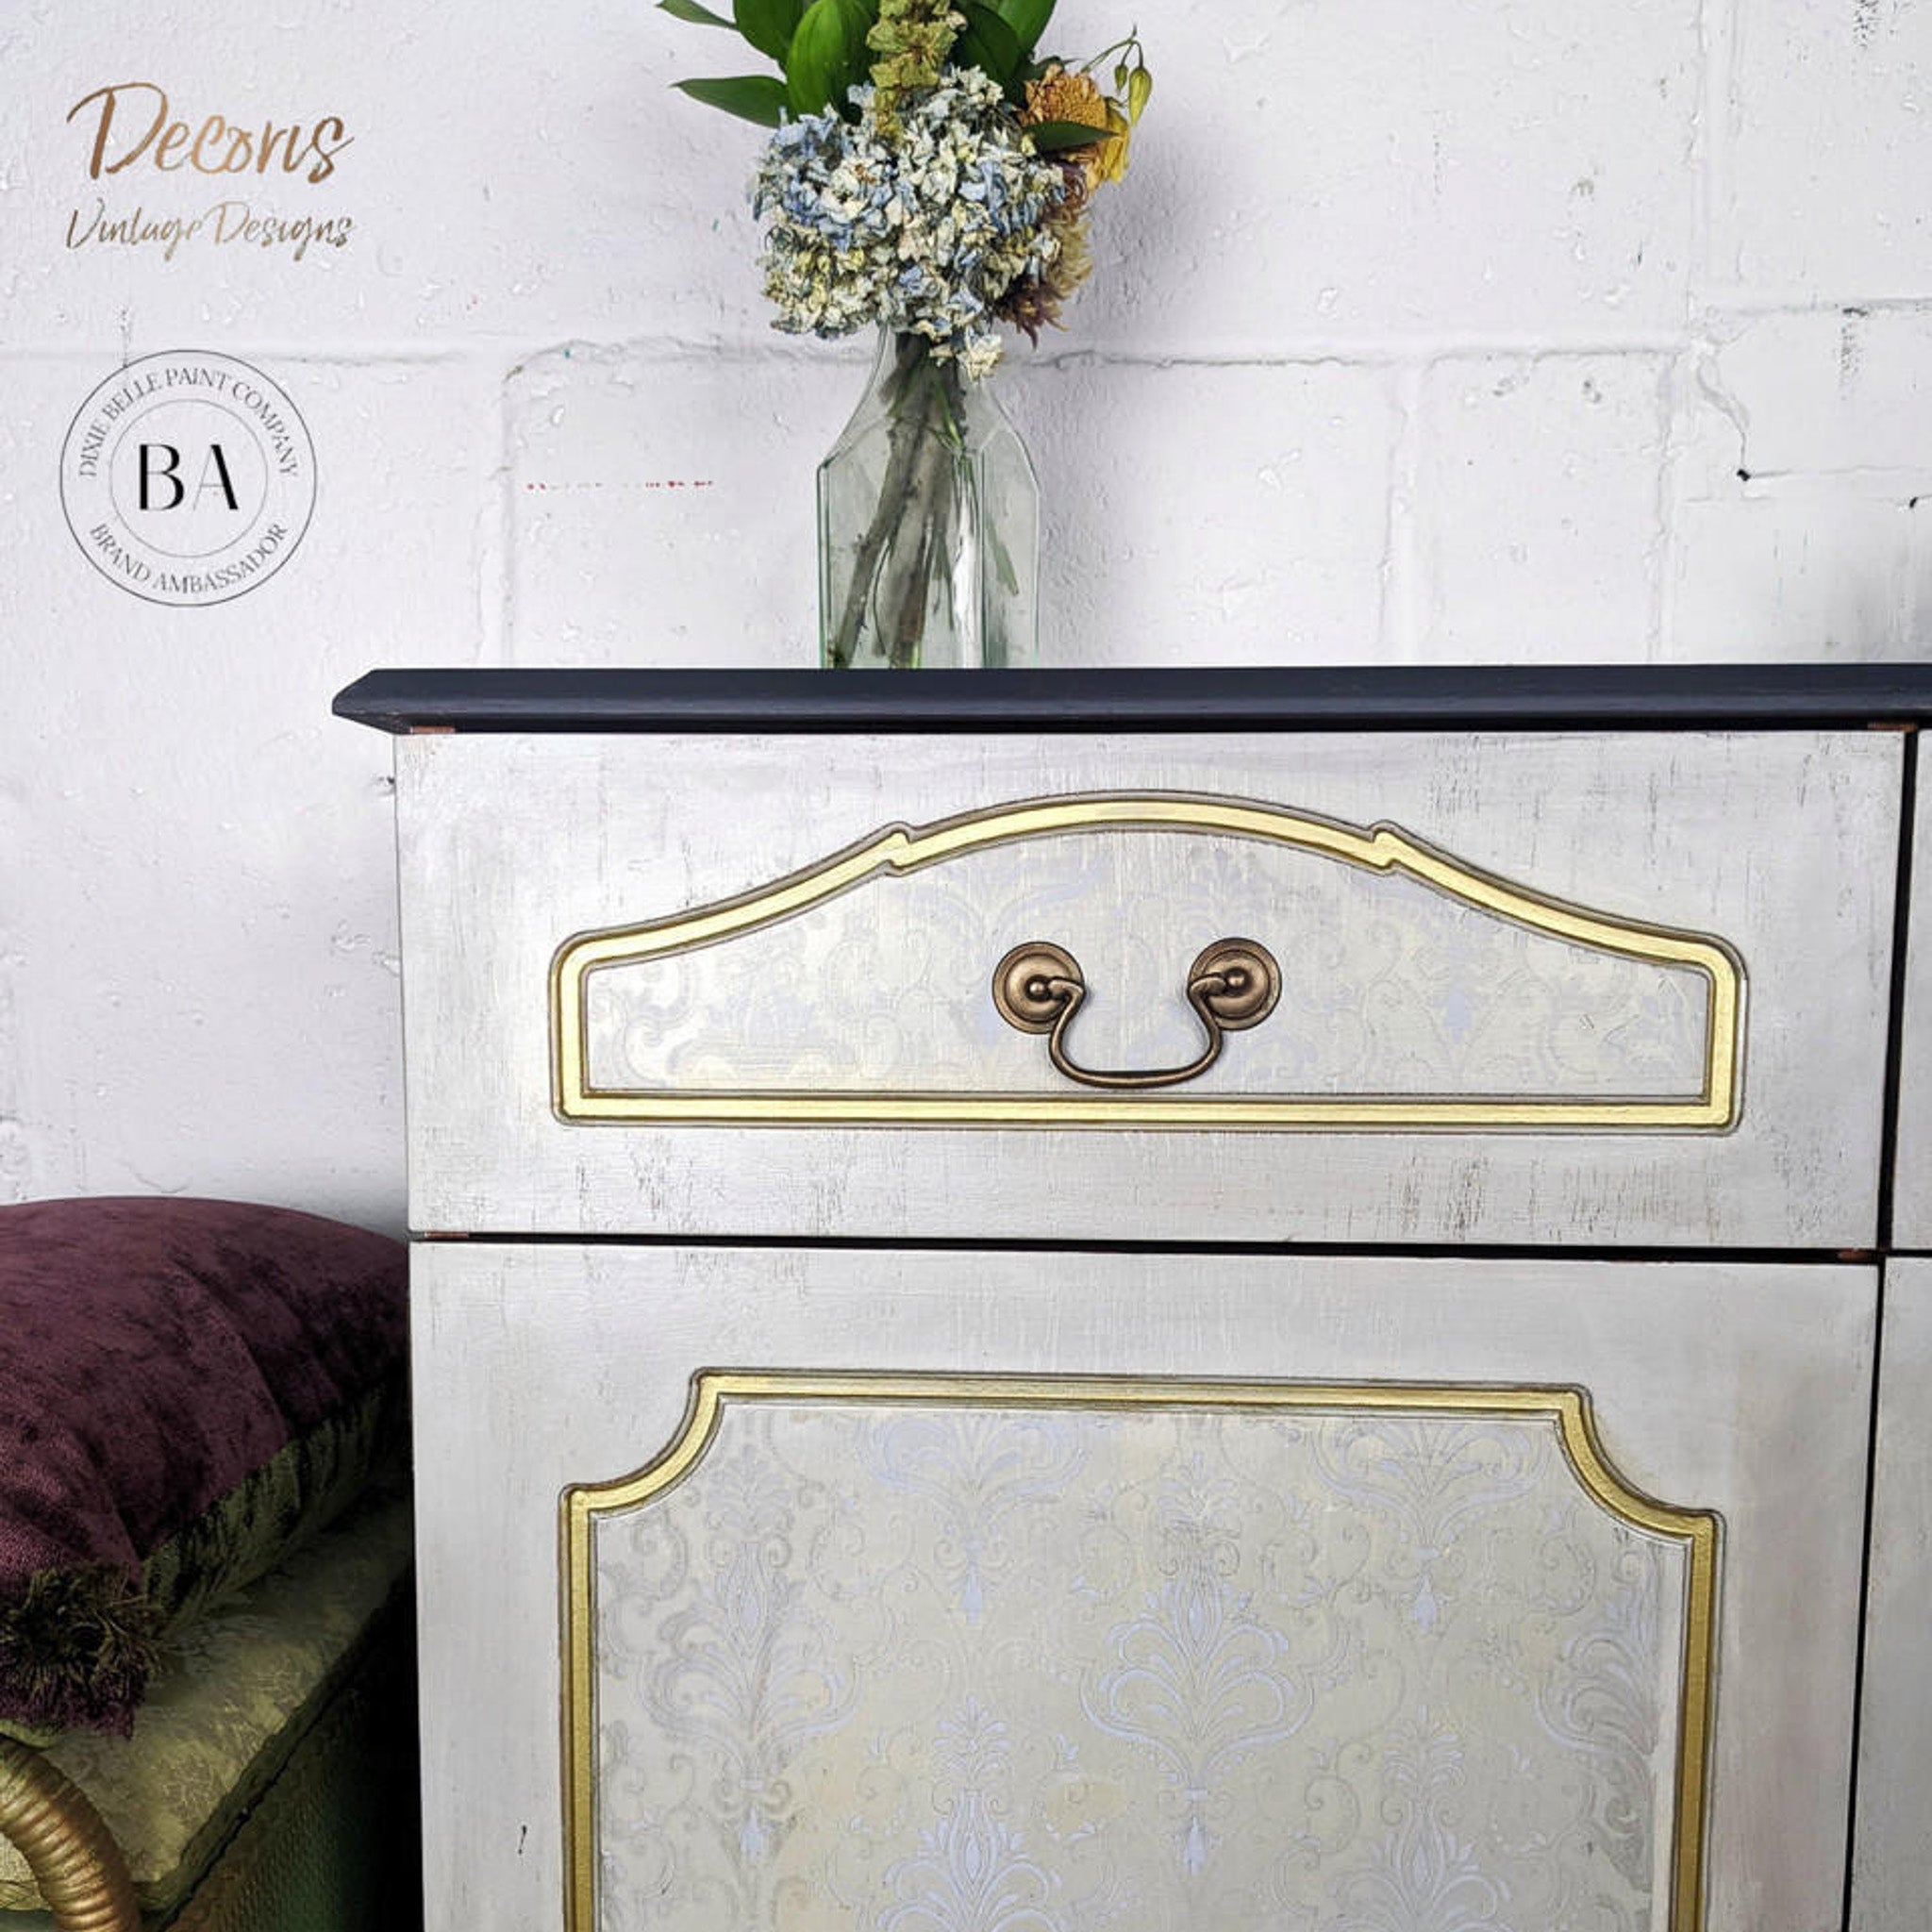 A close-up of a vintage dresser refurbished by Decoris Vintage Designs is painted light grey with gold accents and features Dixie Belle Paint's Hi Ho Silver Glaze as a stencil design on the door and drawer center inlays.